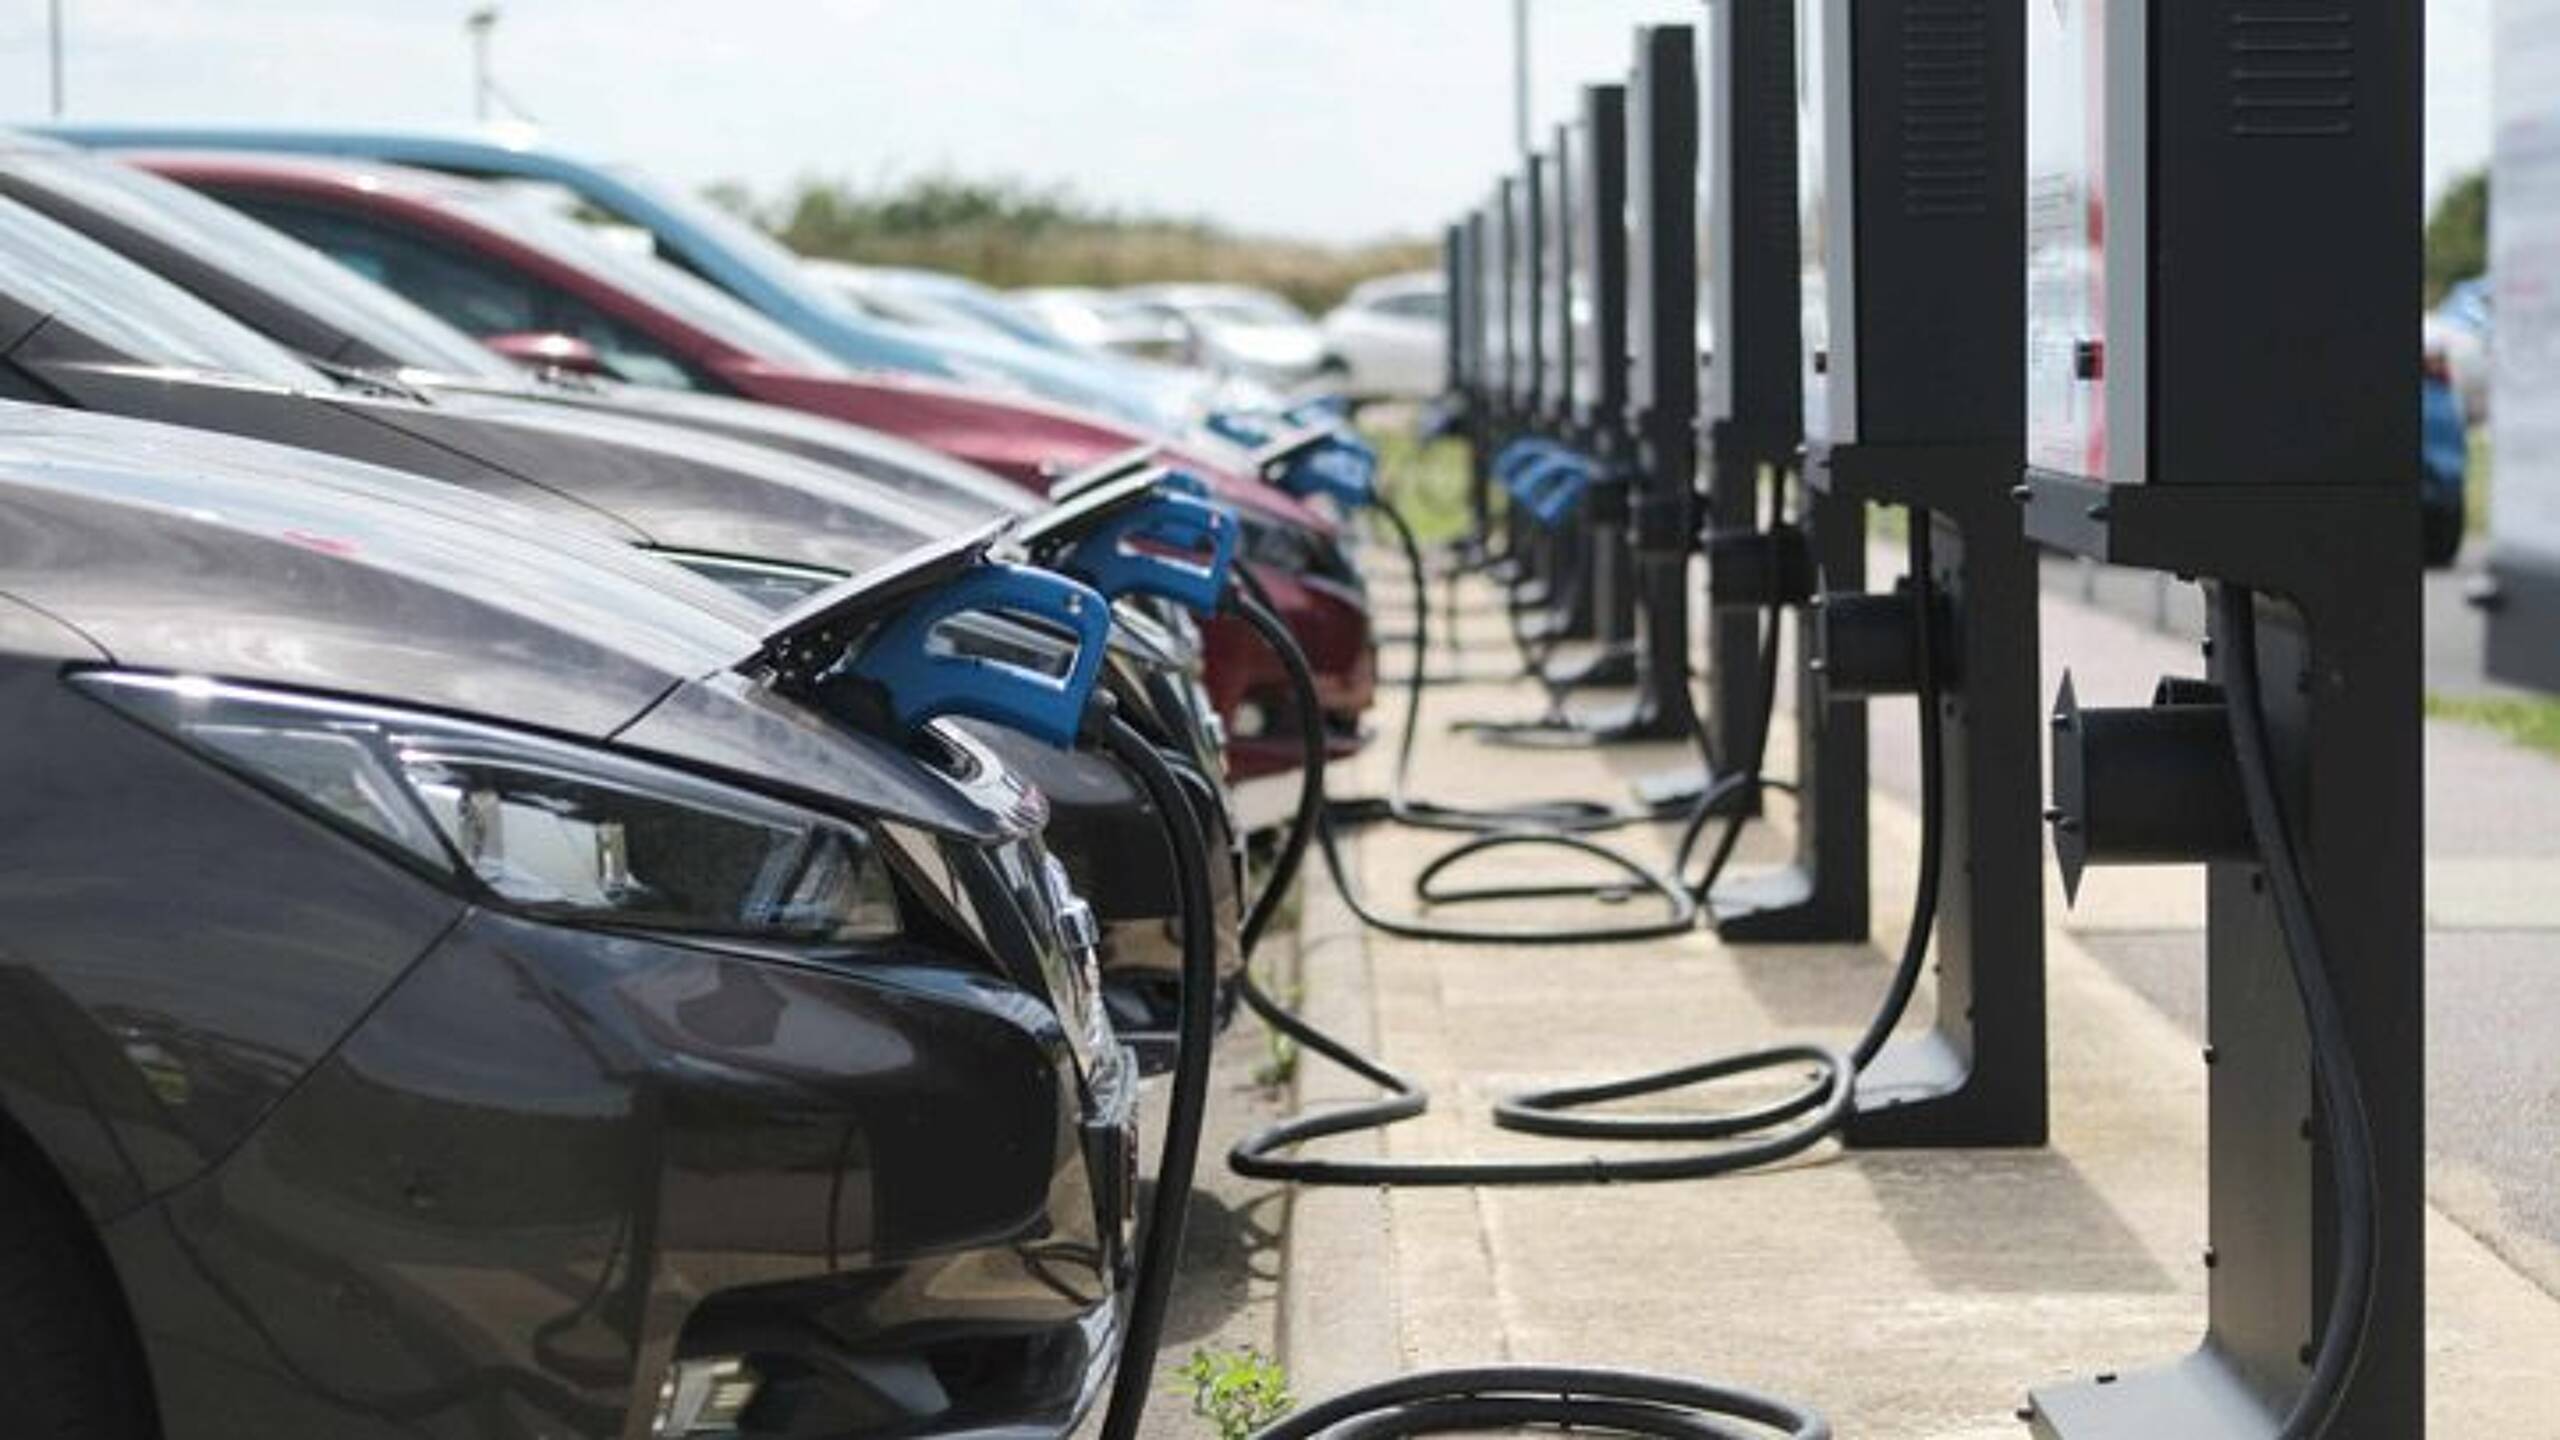 Vehicle-to-Grid rollout could deliver £880m in annual savings